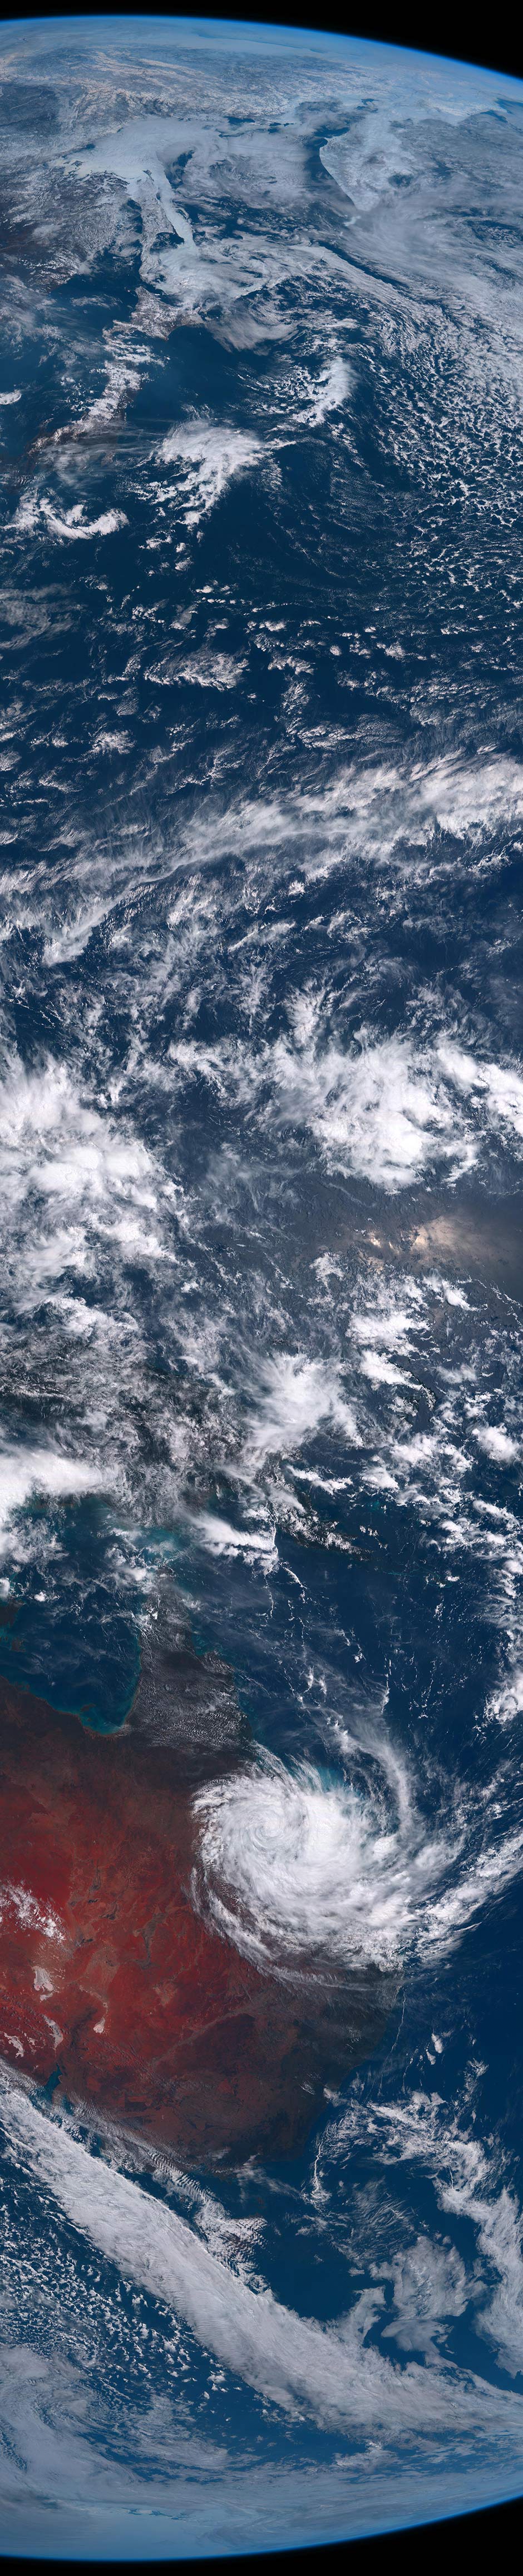 A view of the Earth from space captures ex-tropical cyclone Debbie over Queensland.